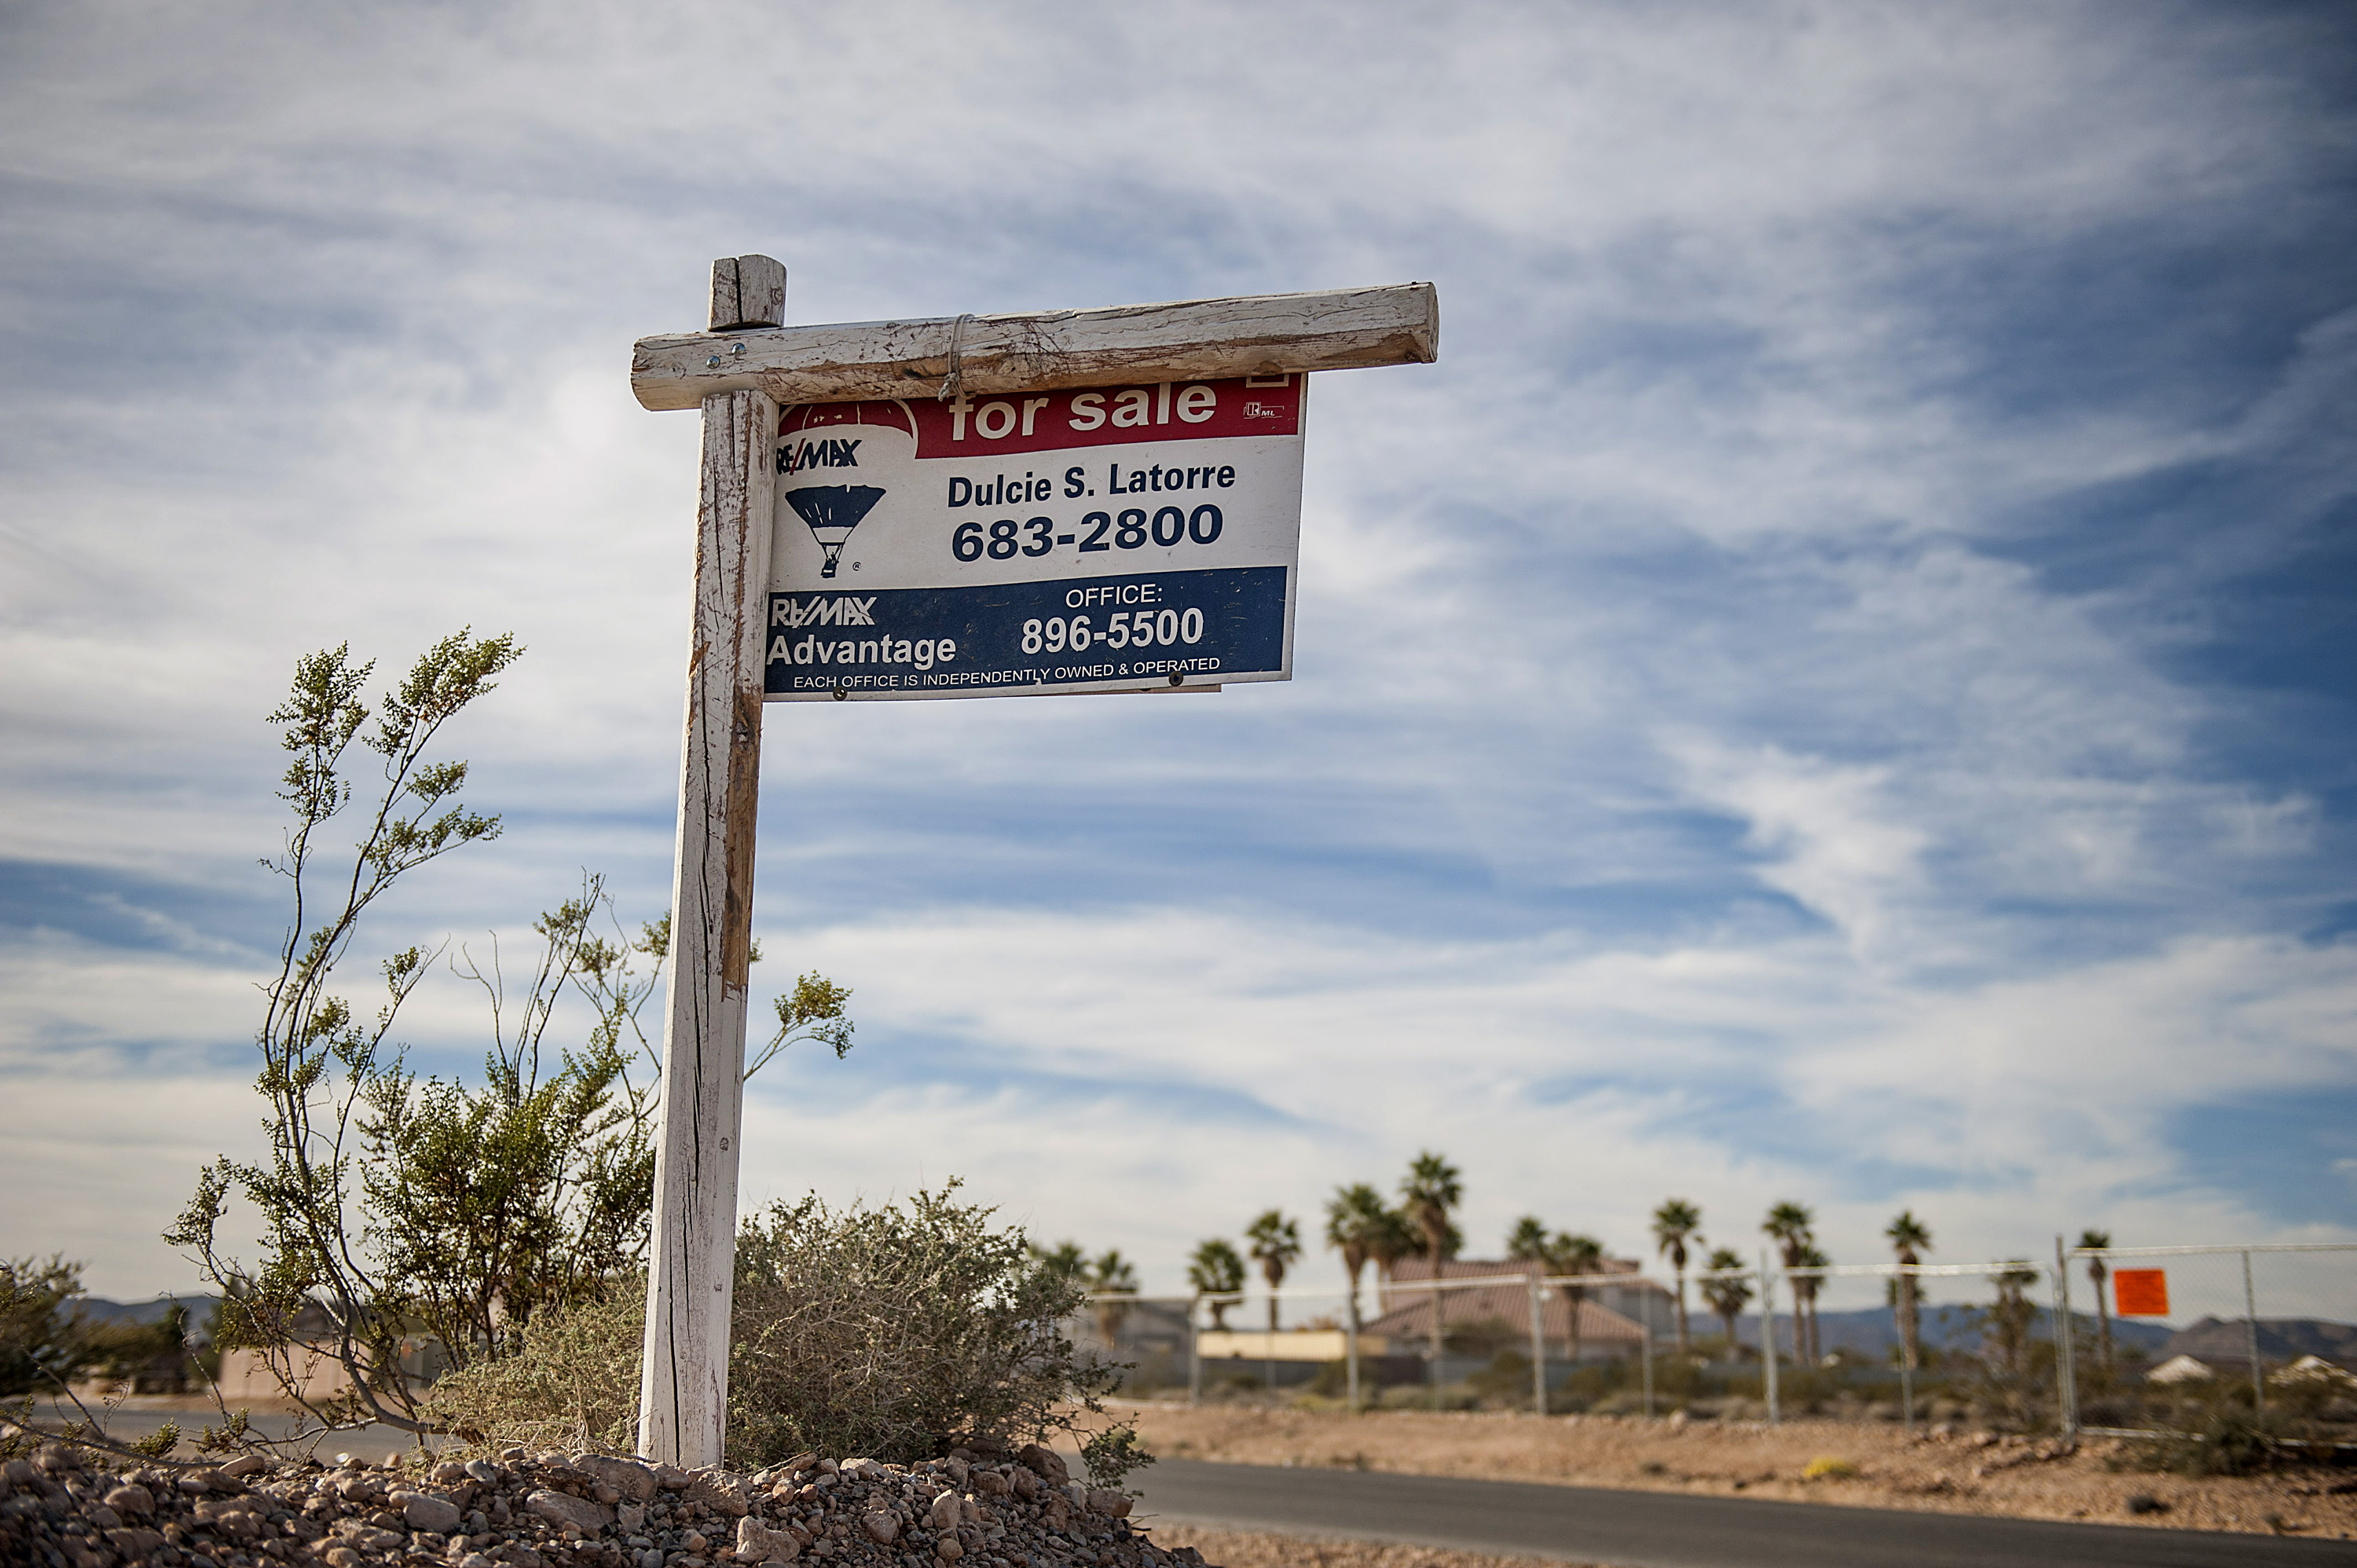 A RE/MAX LLC 'For Sale' sign stands outside of a home in Las Vegas, Nevada, U.S. Photo: Bloomberg